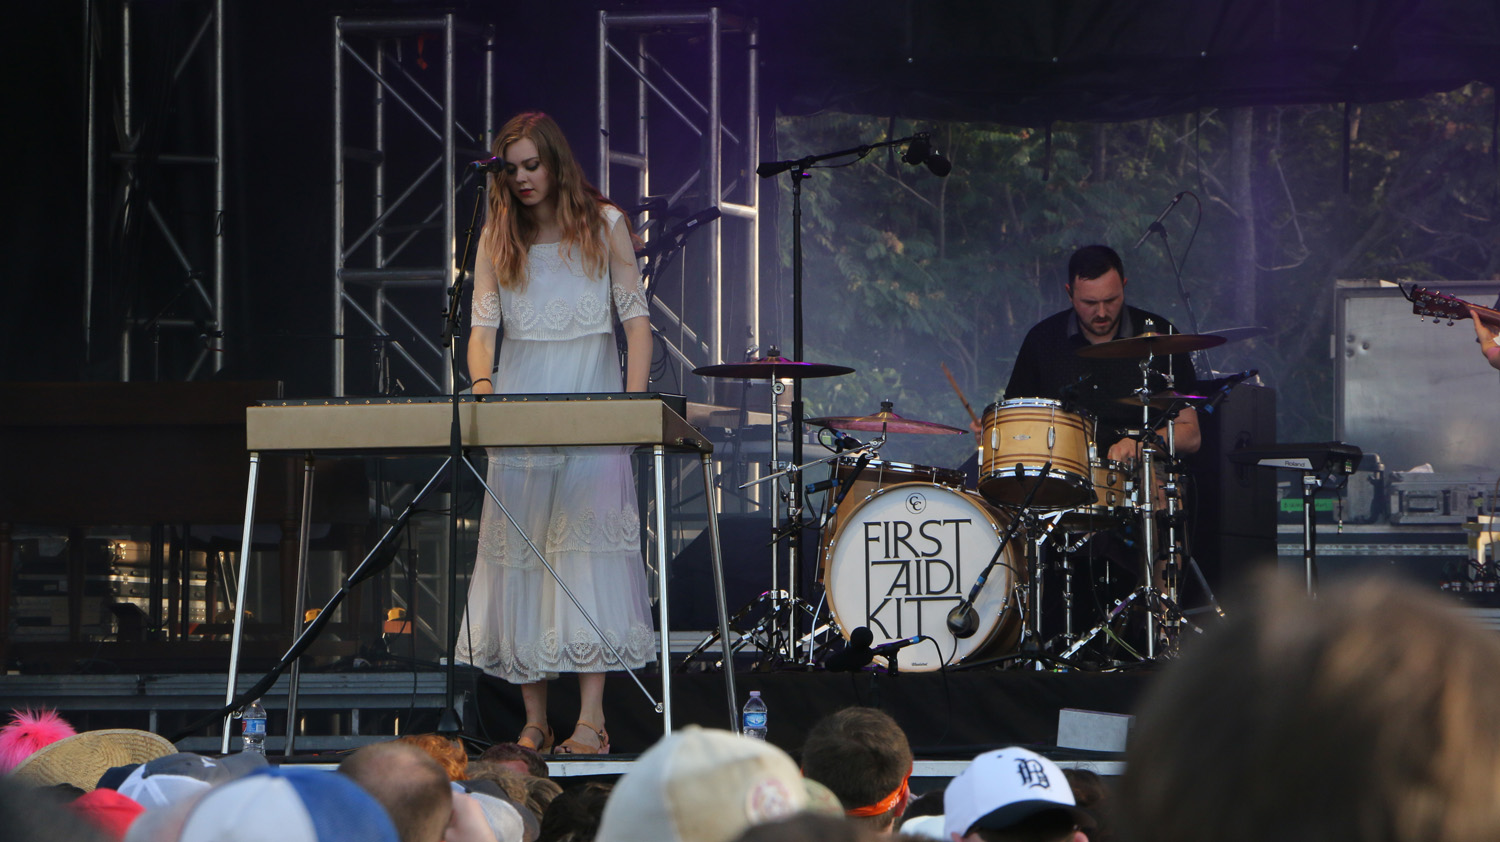 Johanna Söderberg, left, and Scott Simpson, right, of First Aid Kit perform at the Sloss Music & Arts Festival in Birmingham, Ala., on Saturday, July 18, 2015. (MTSU Sidelines / John Connor Coulston)